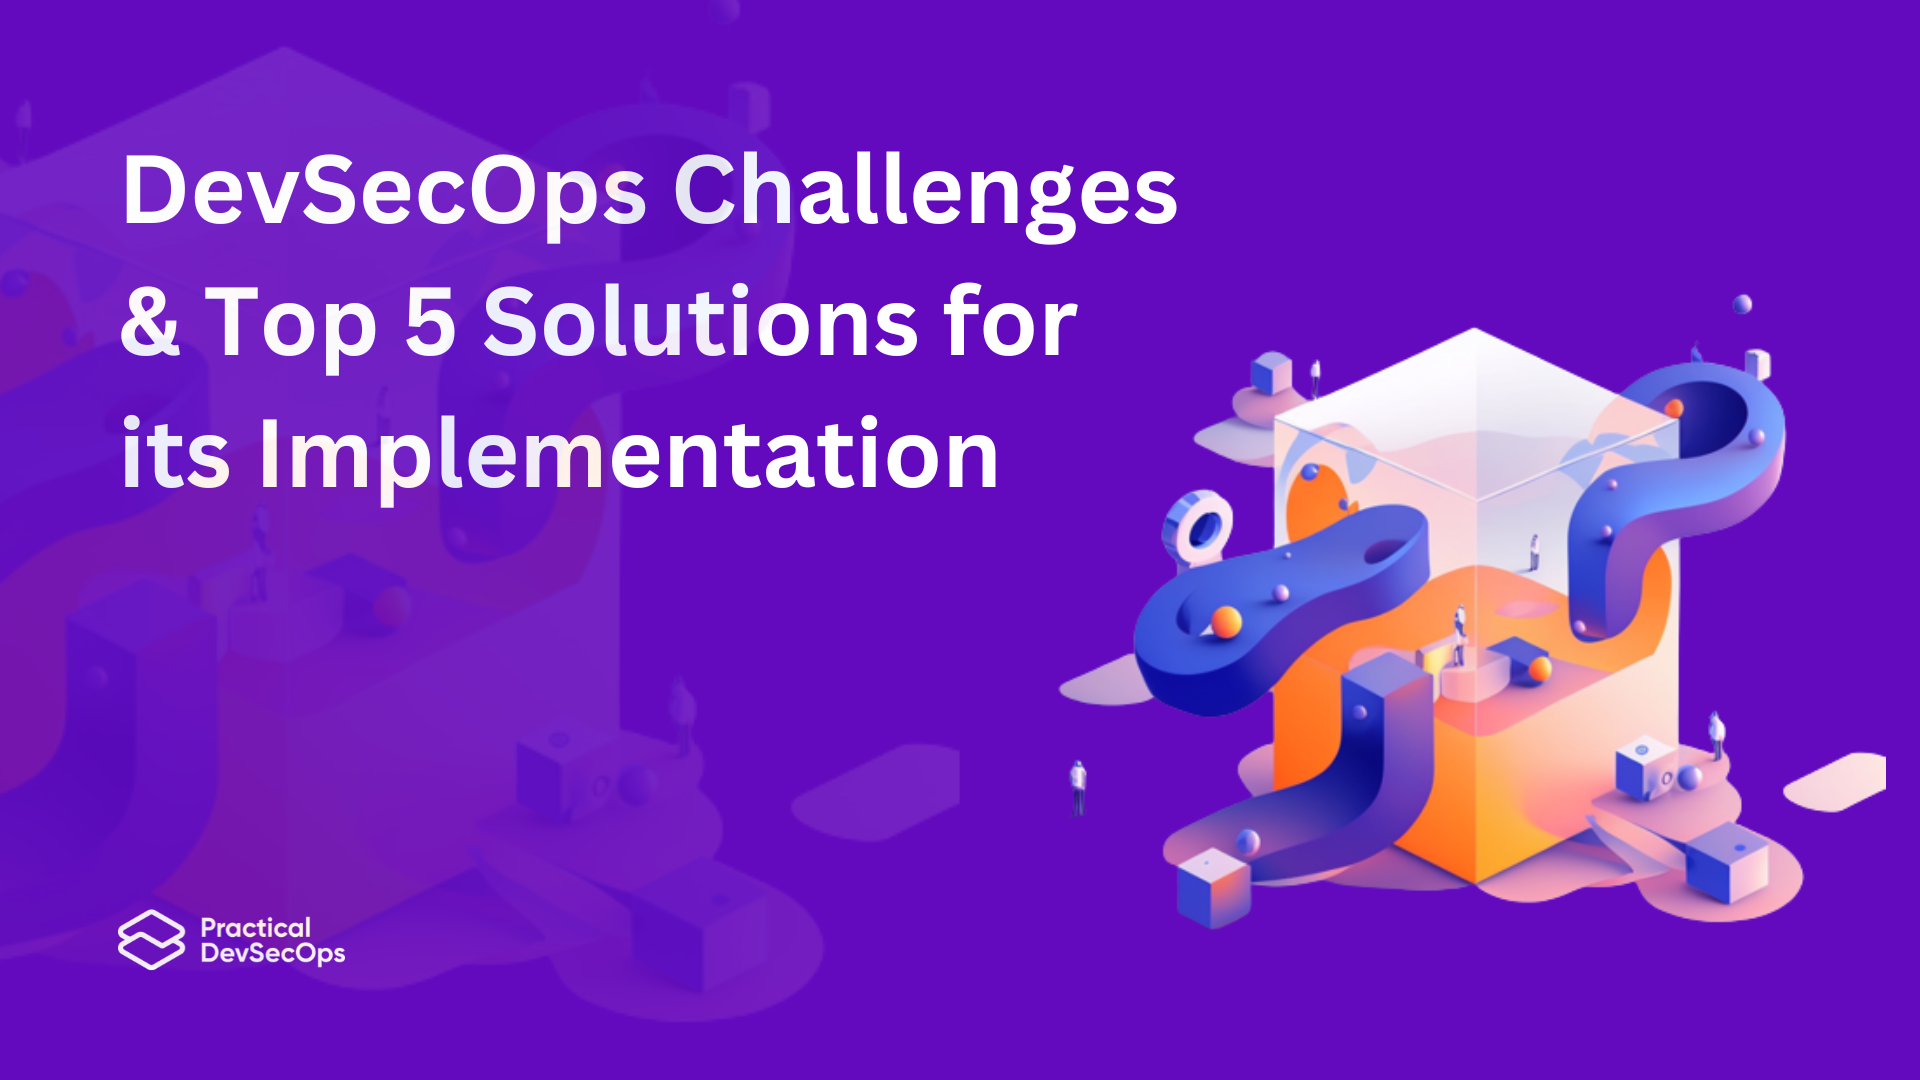 DevSecOps Challenges & Top 5 Solutions for its Implementation